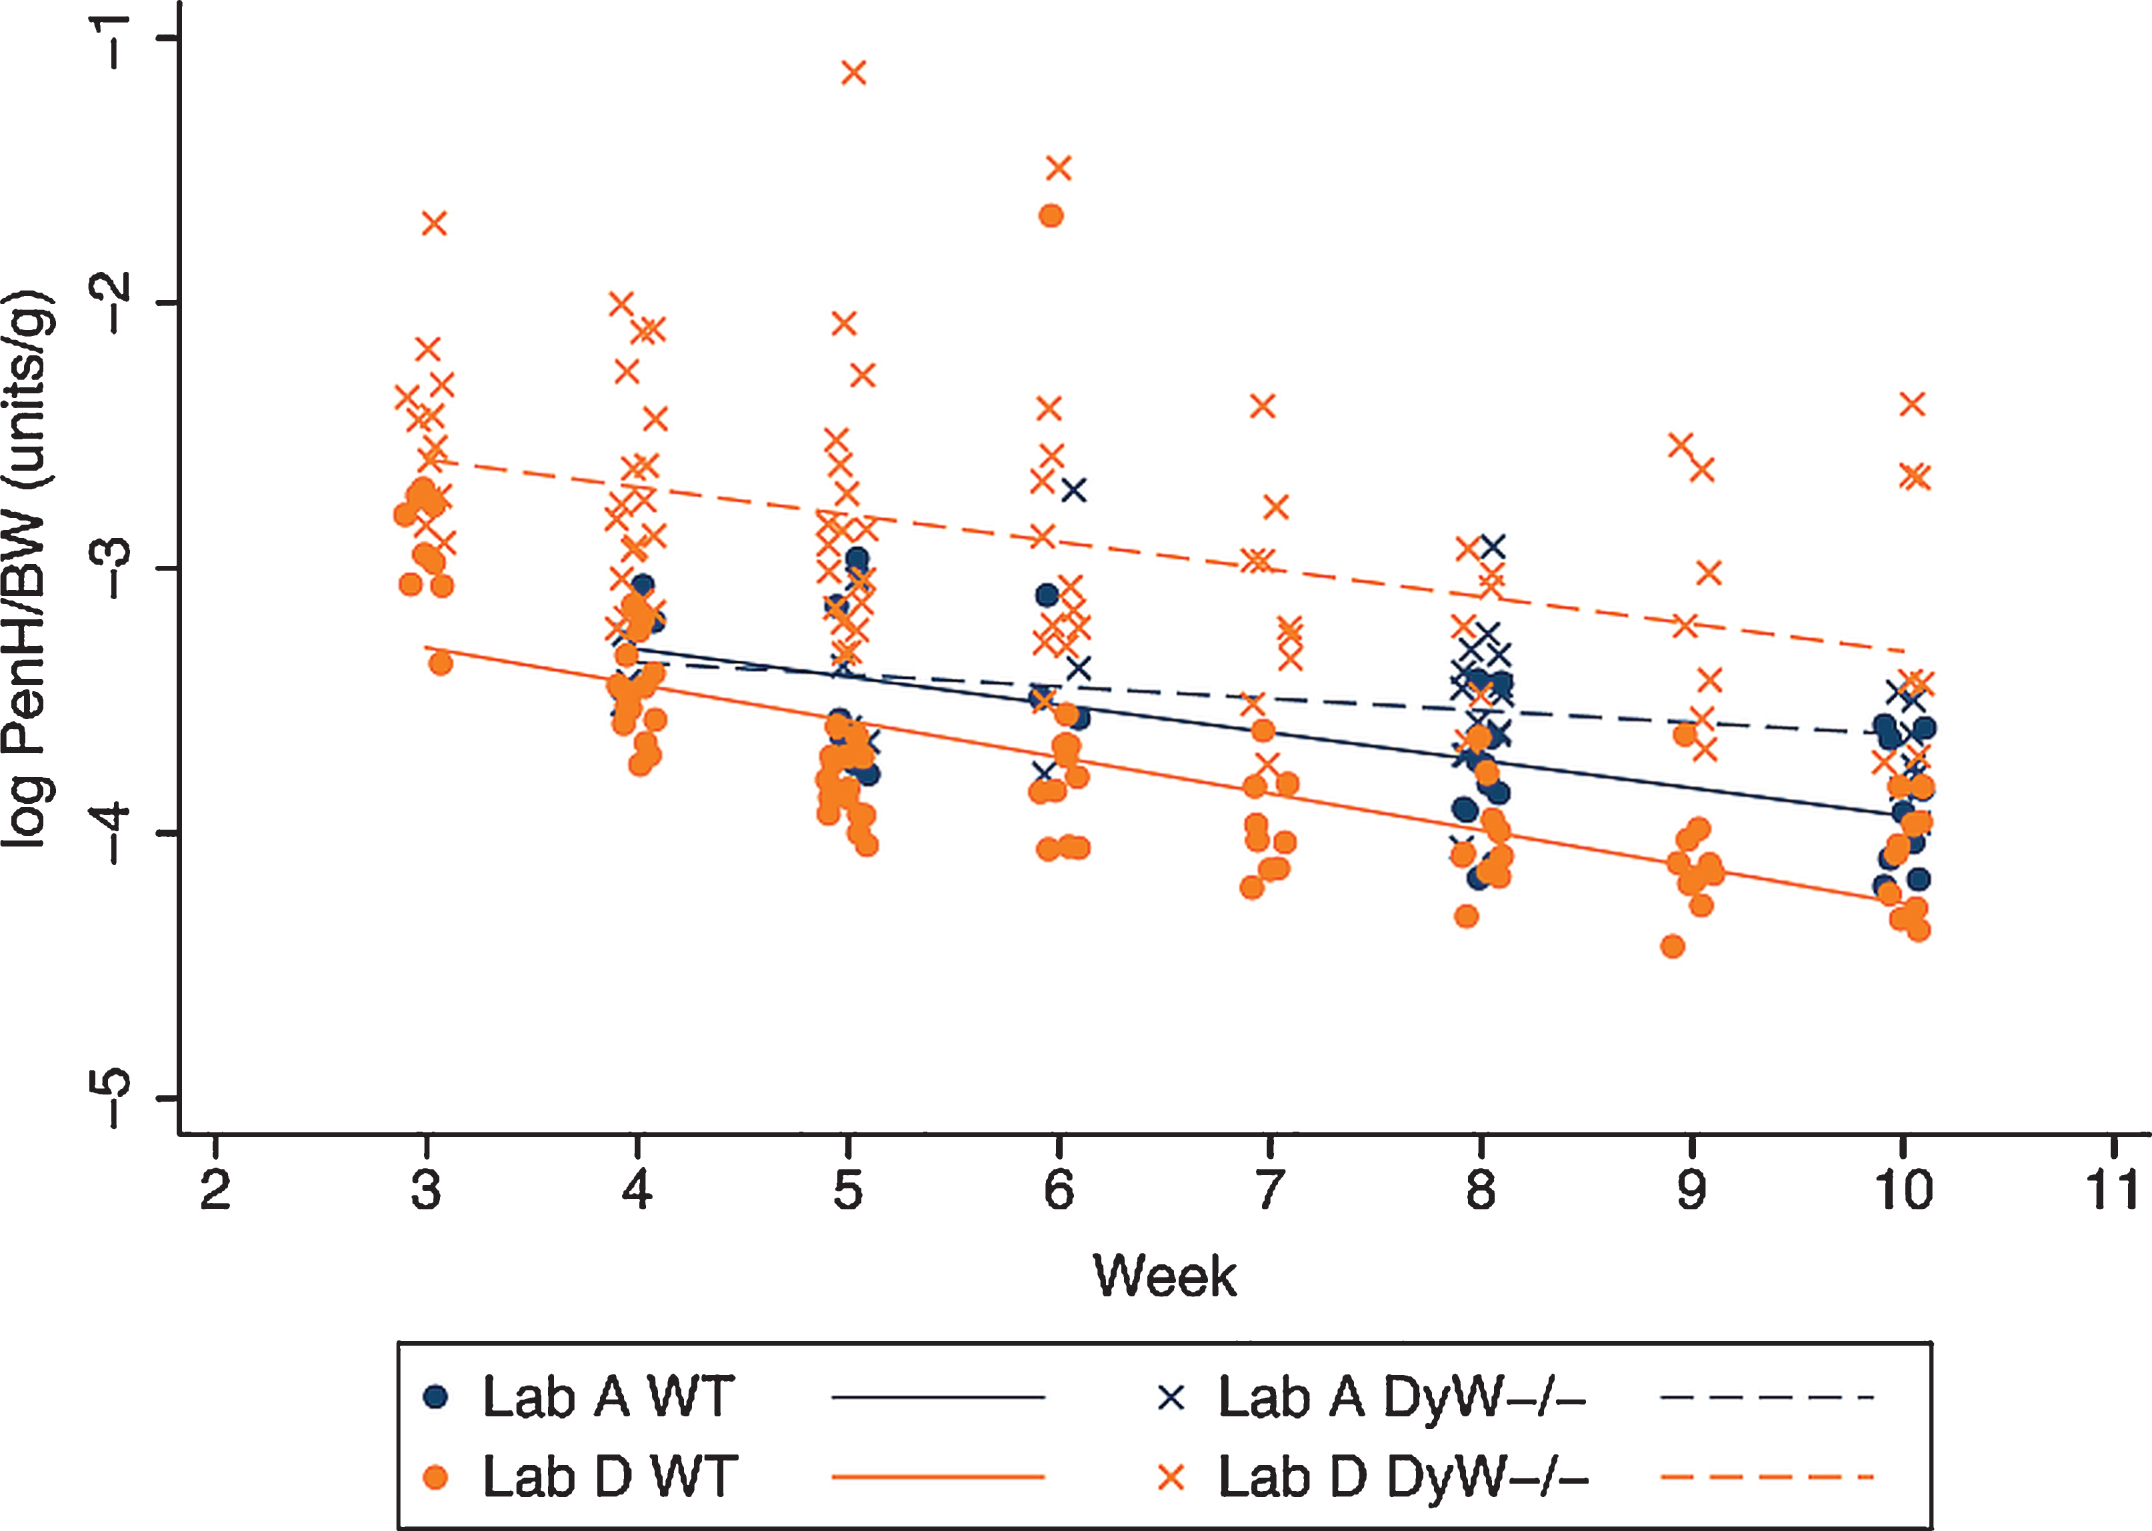 Body weight normalized PenH values over time in both DyW and WT mice. The change in logarithm transformed body weight normalized PenH values (PenH/BW) over time is shown for both WT and DyW mice from the two laboratories reporting results. Individual log PenH/BW in WT mice are represented with circles and regression lines from the mixed effects linear model are represented by solid lines. Individual log PenH/BW in DyW mice are represented with X’s and regression lines from the mixed effects linear model are represented by dashed lines.